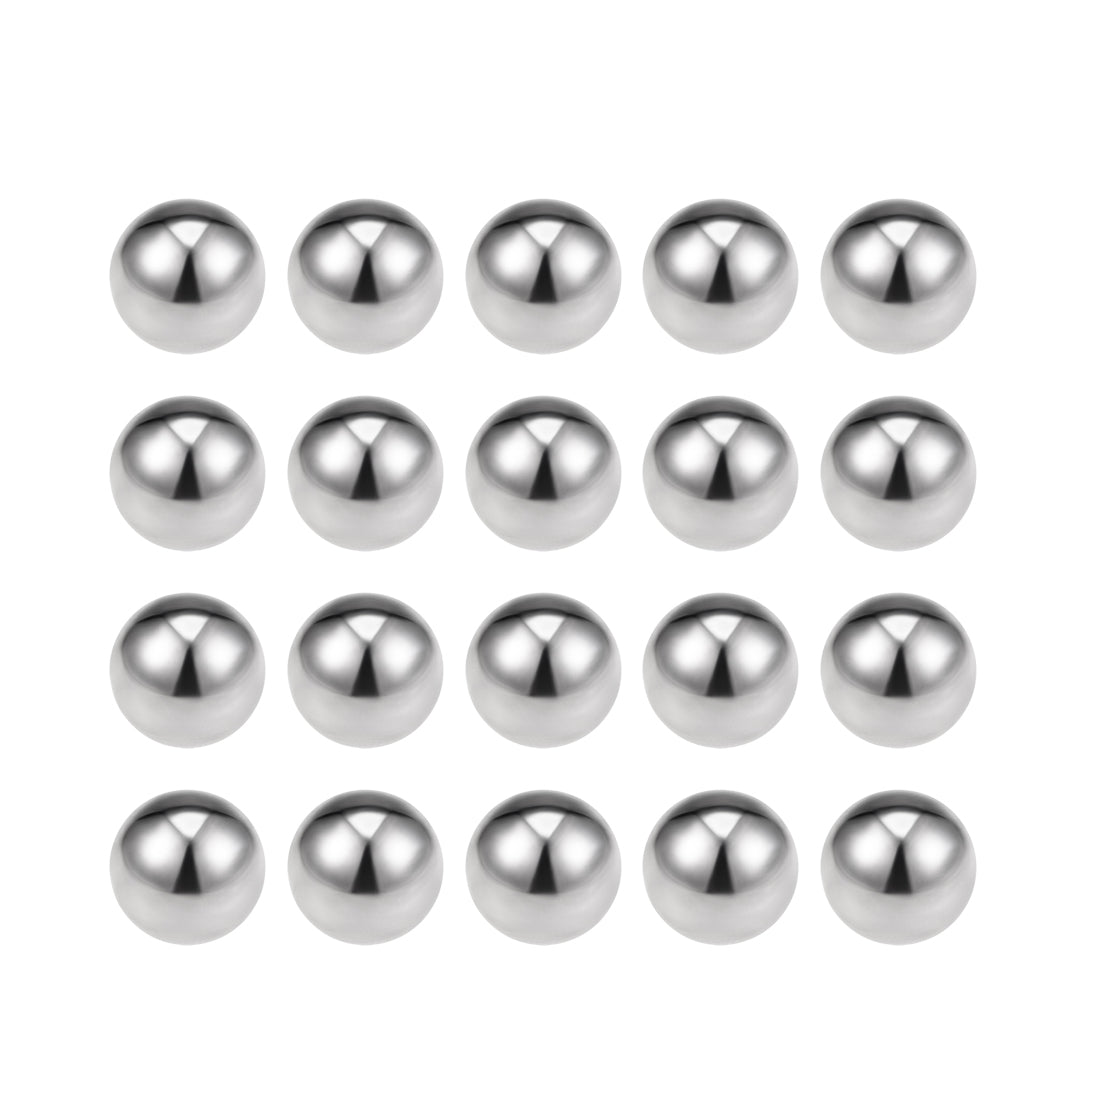 Uxcell Uxcell 1/8" Bearing Balls 304 Stainless Steel G100 Precision Balls 100pcs